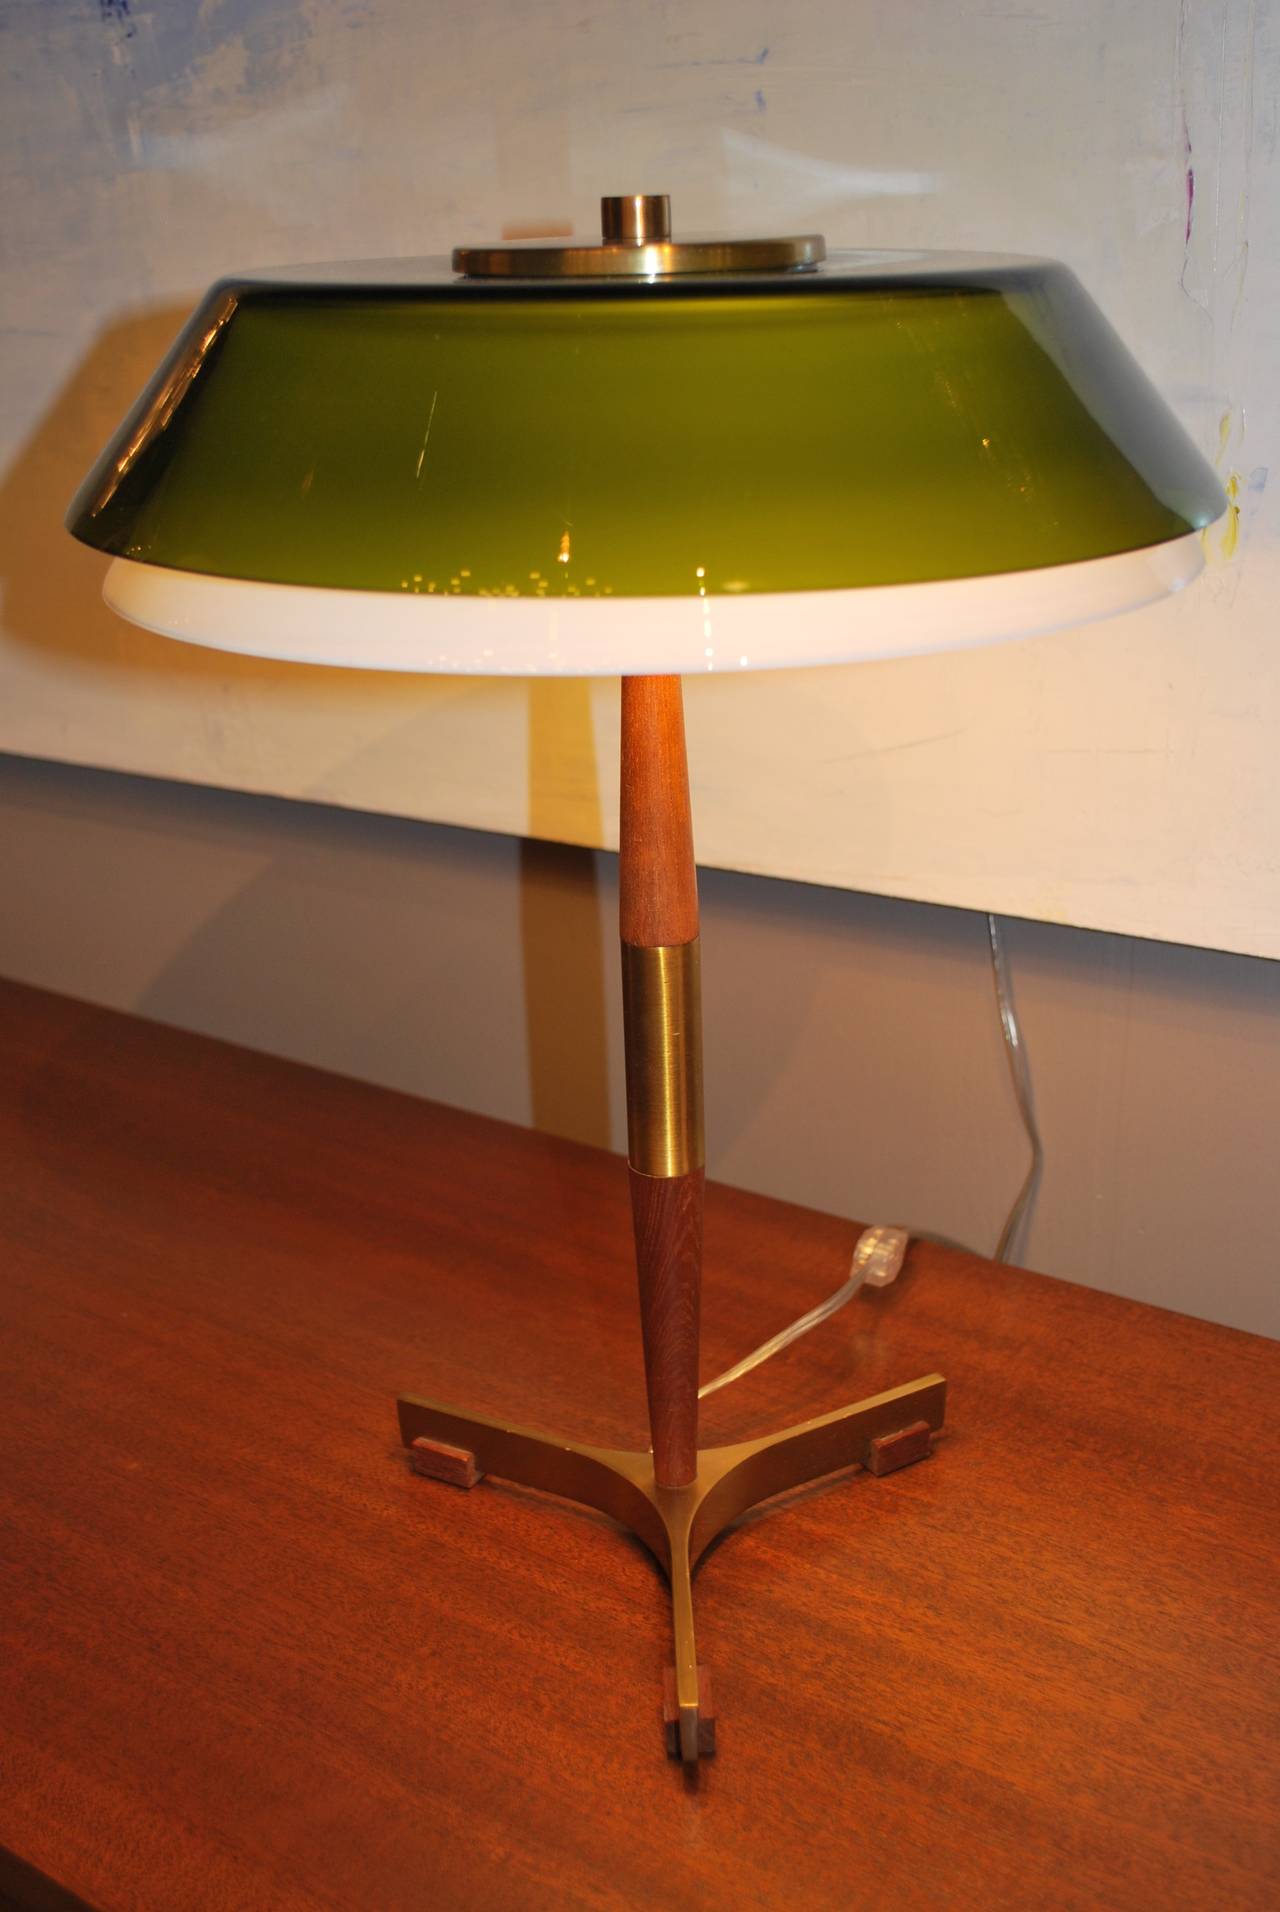 Elegant desk lamp with white milk glass shade and additional green shade by Jo Hammerborg, Denmark, produced in 1963. Teak body with brass base and details. Newly electrified. Label on green shade.